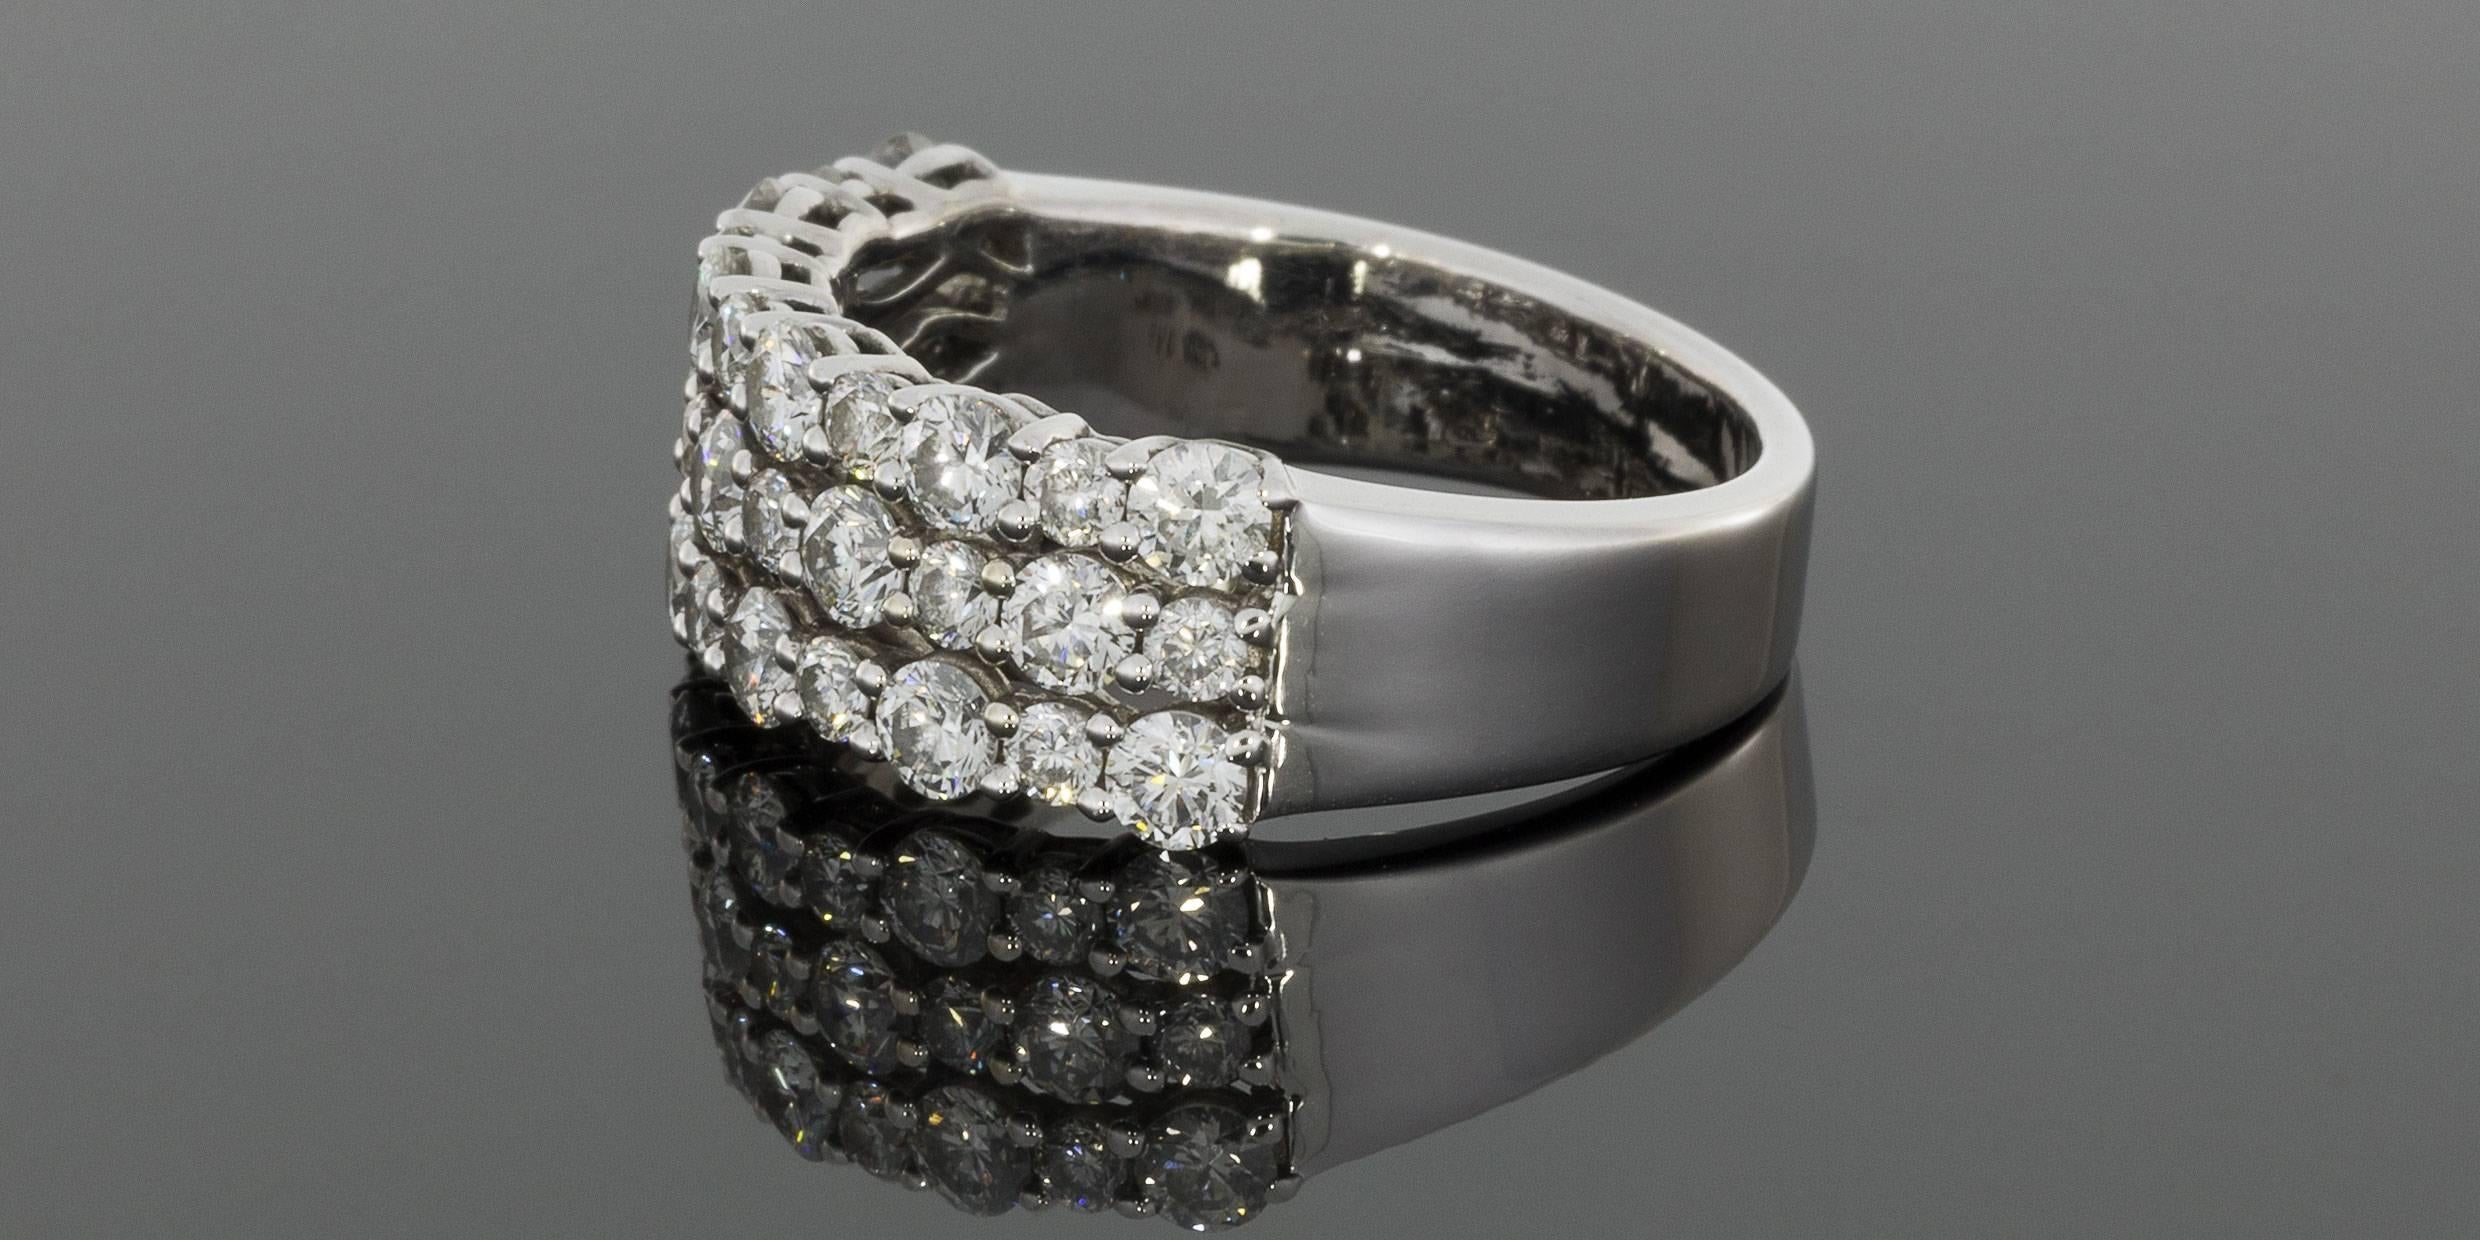 This beautiful & sparkly ring features 37 round brilliant diamonds that have a combined total weight of 1.73 carats. The diamonds are shared prong set, alternating between larger & smaller diamonds, in a three row style band. The ring is